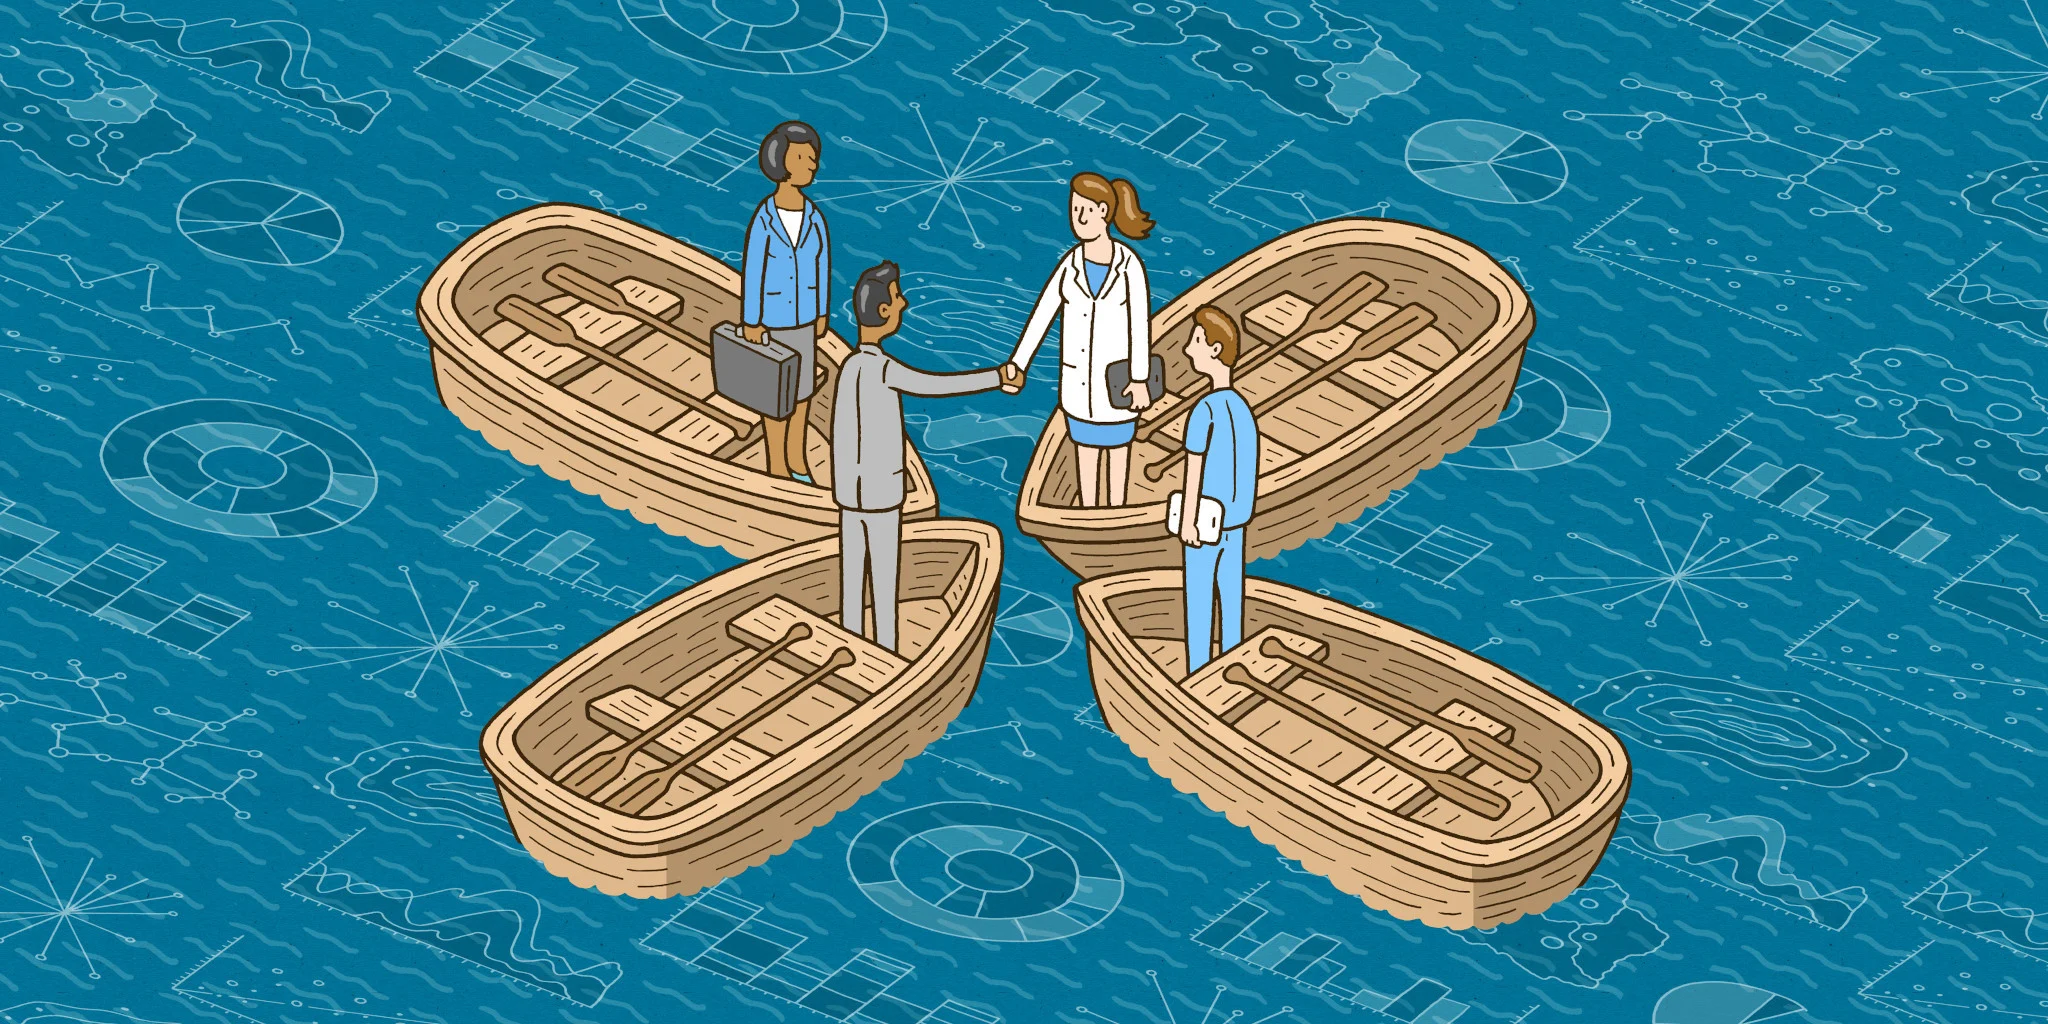 This is an editorial illustration with dark blue background. Four small brown boats meet in the middle of the image. On top of the boats are four researchers. Two researchers shake their hands which symbolizes research collaboration. 